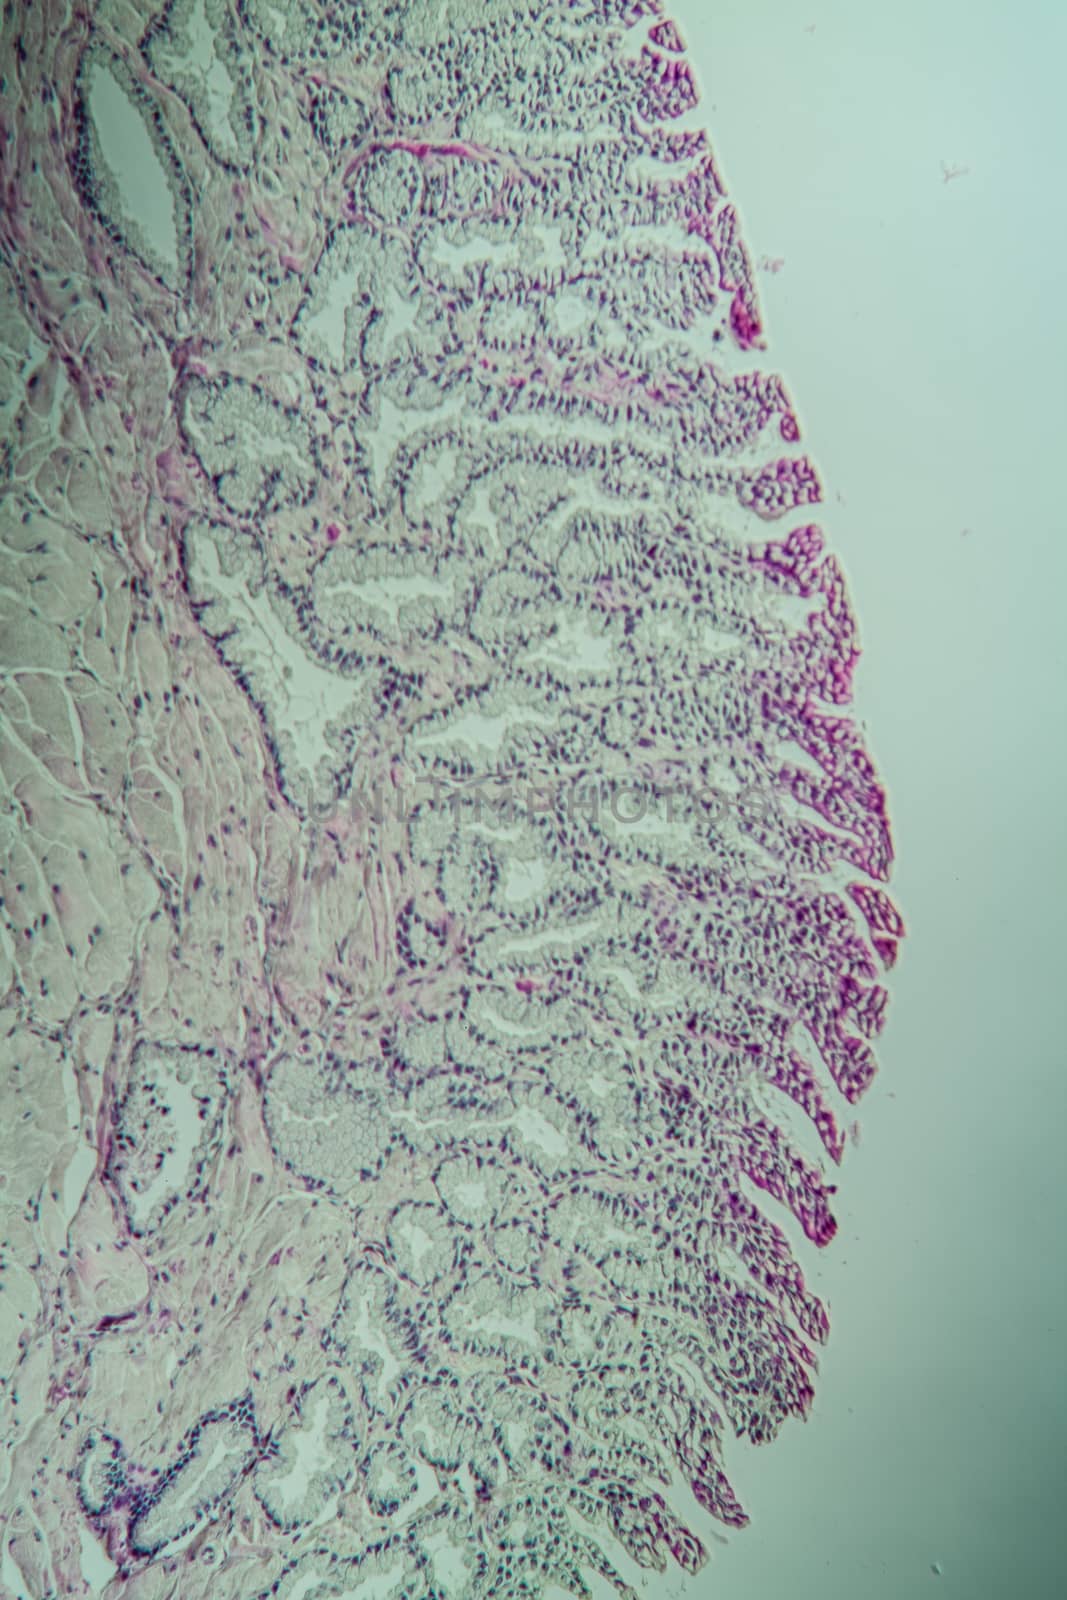 Toad cross section through the tongue 200x